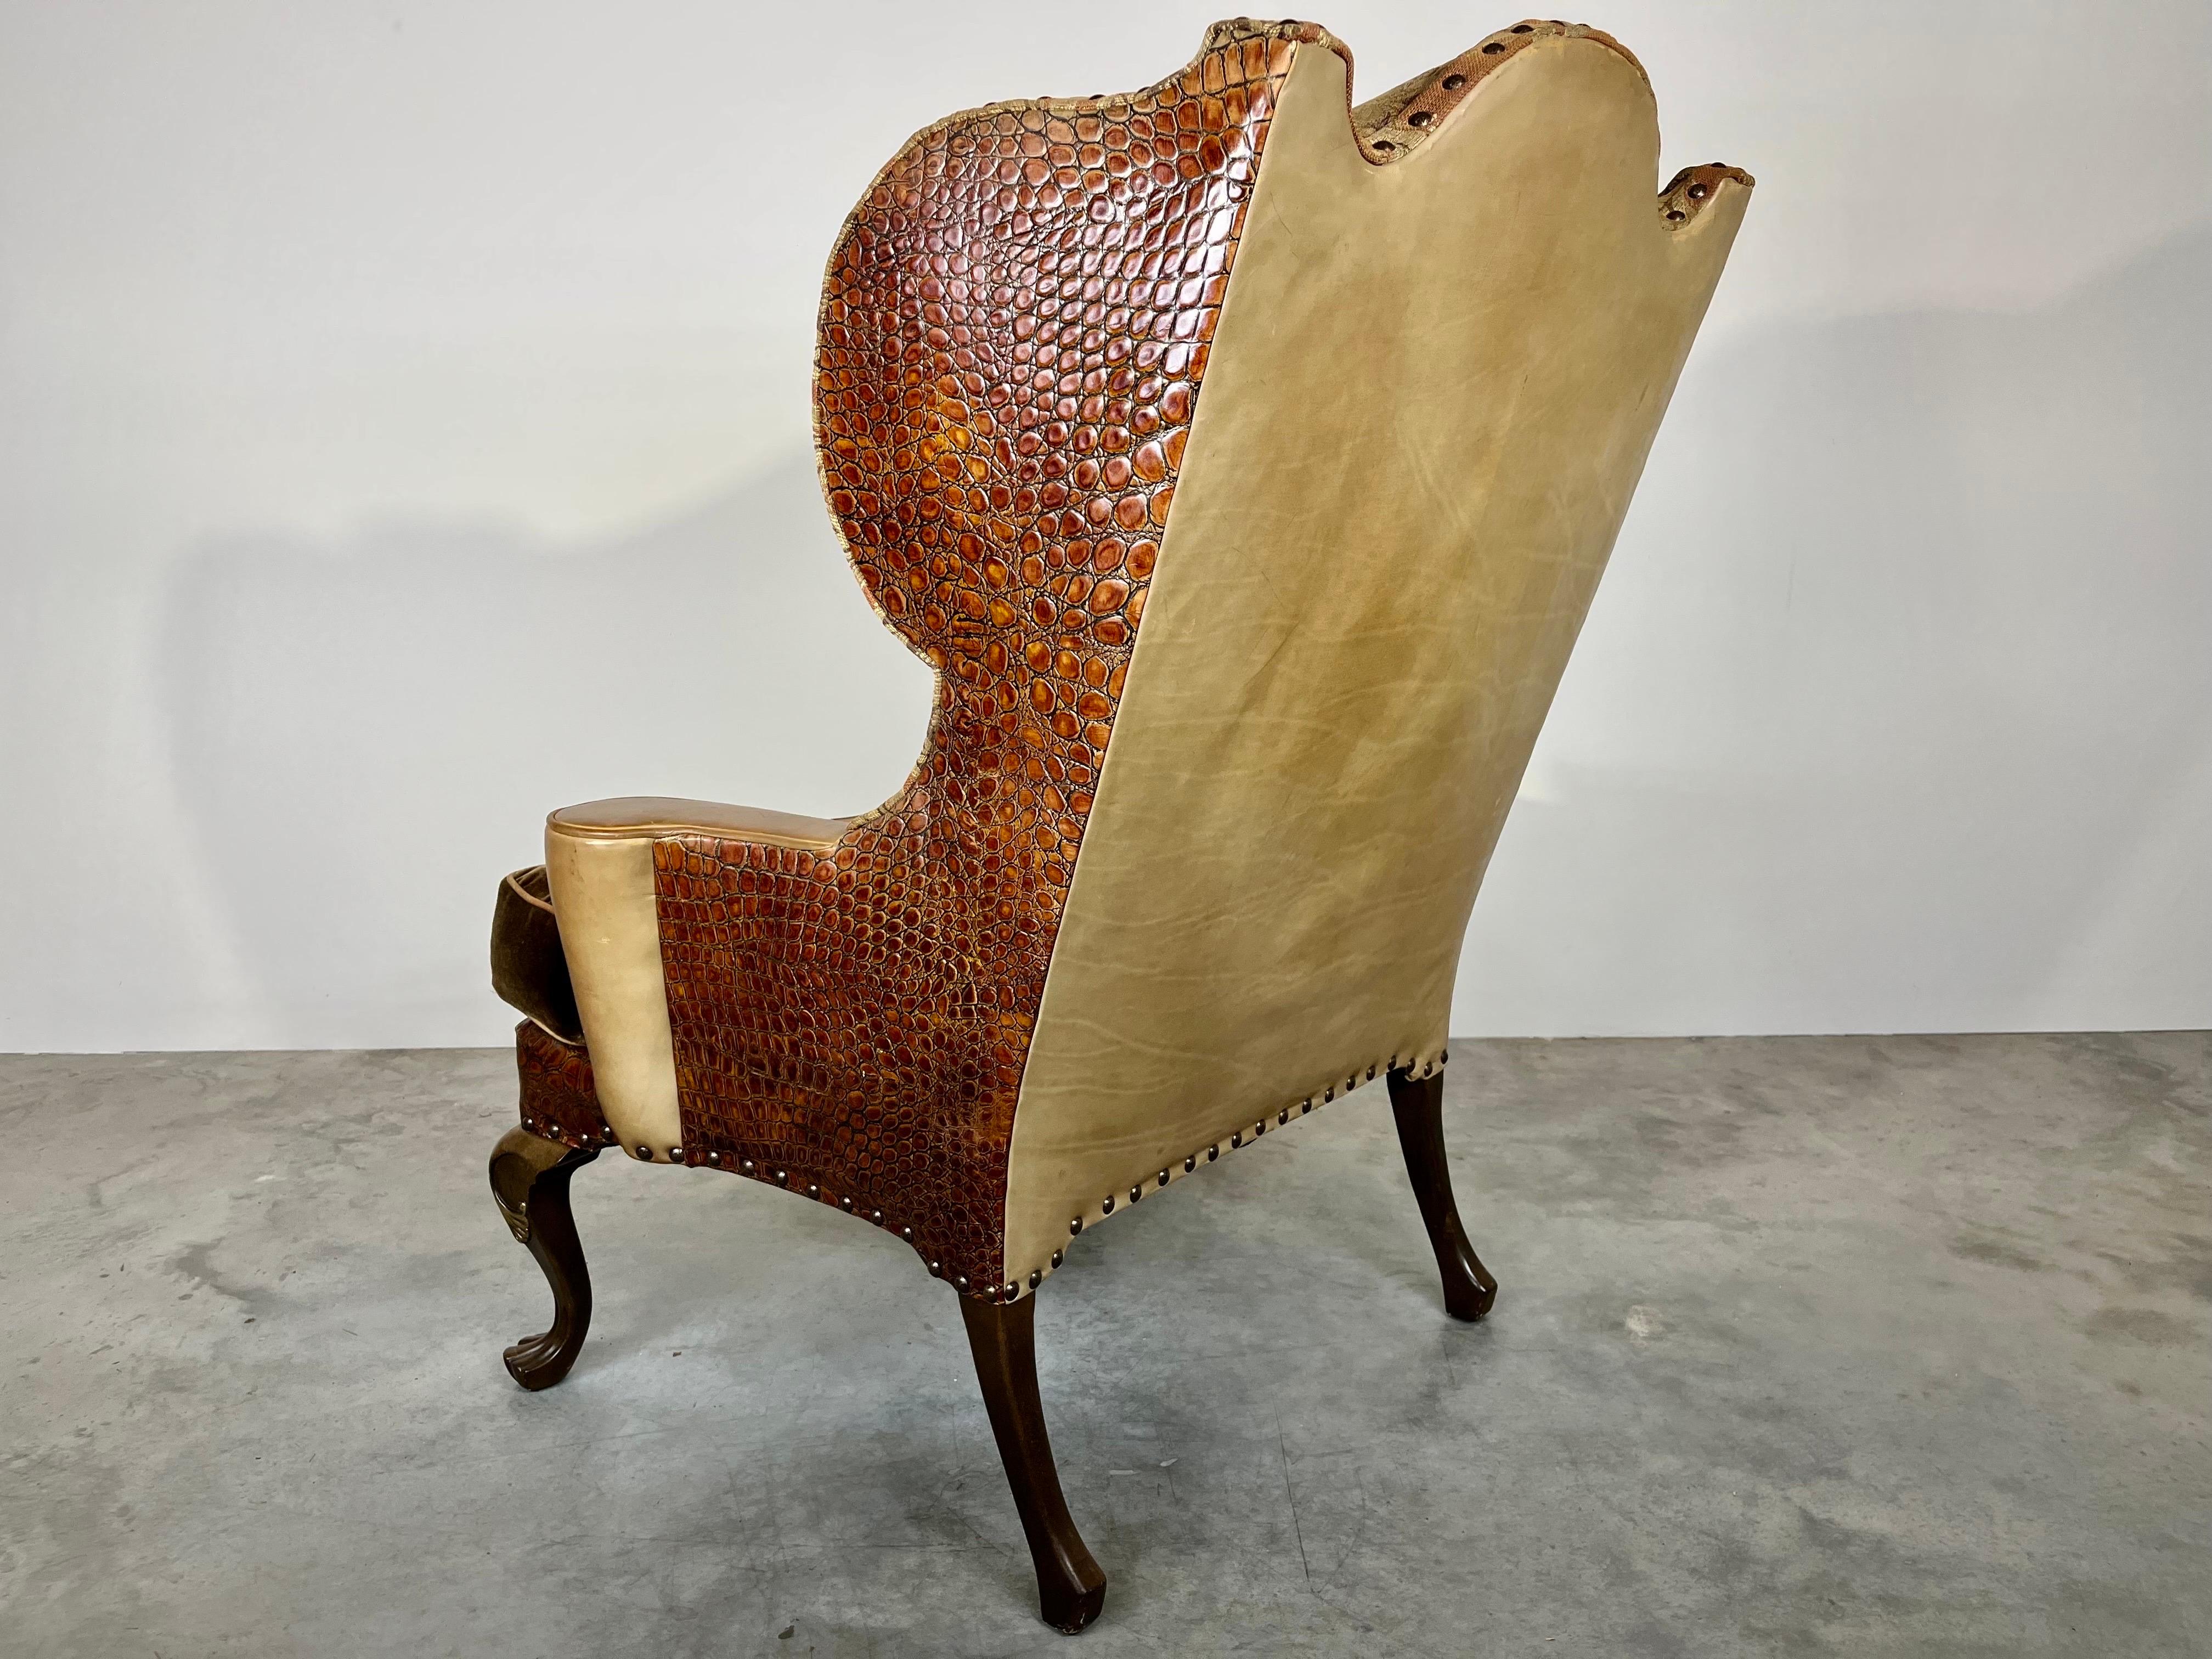 Oversized Wingback Chair by Century Furniture having claw feet with custom faux gator leather and mohair down seat cushion designed by David Vanderbloemen, b. 1955 who designed for Century from 1985. David Worked directly with Jay Spectre on all of